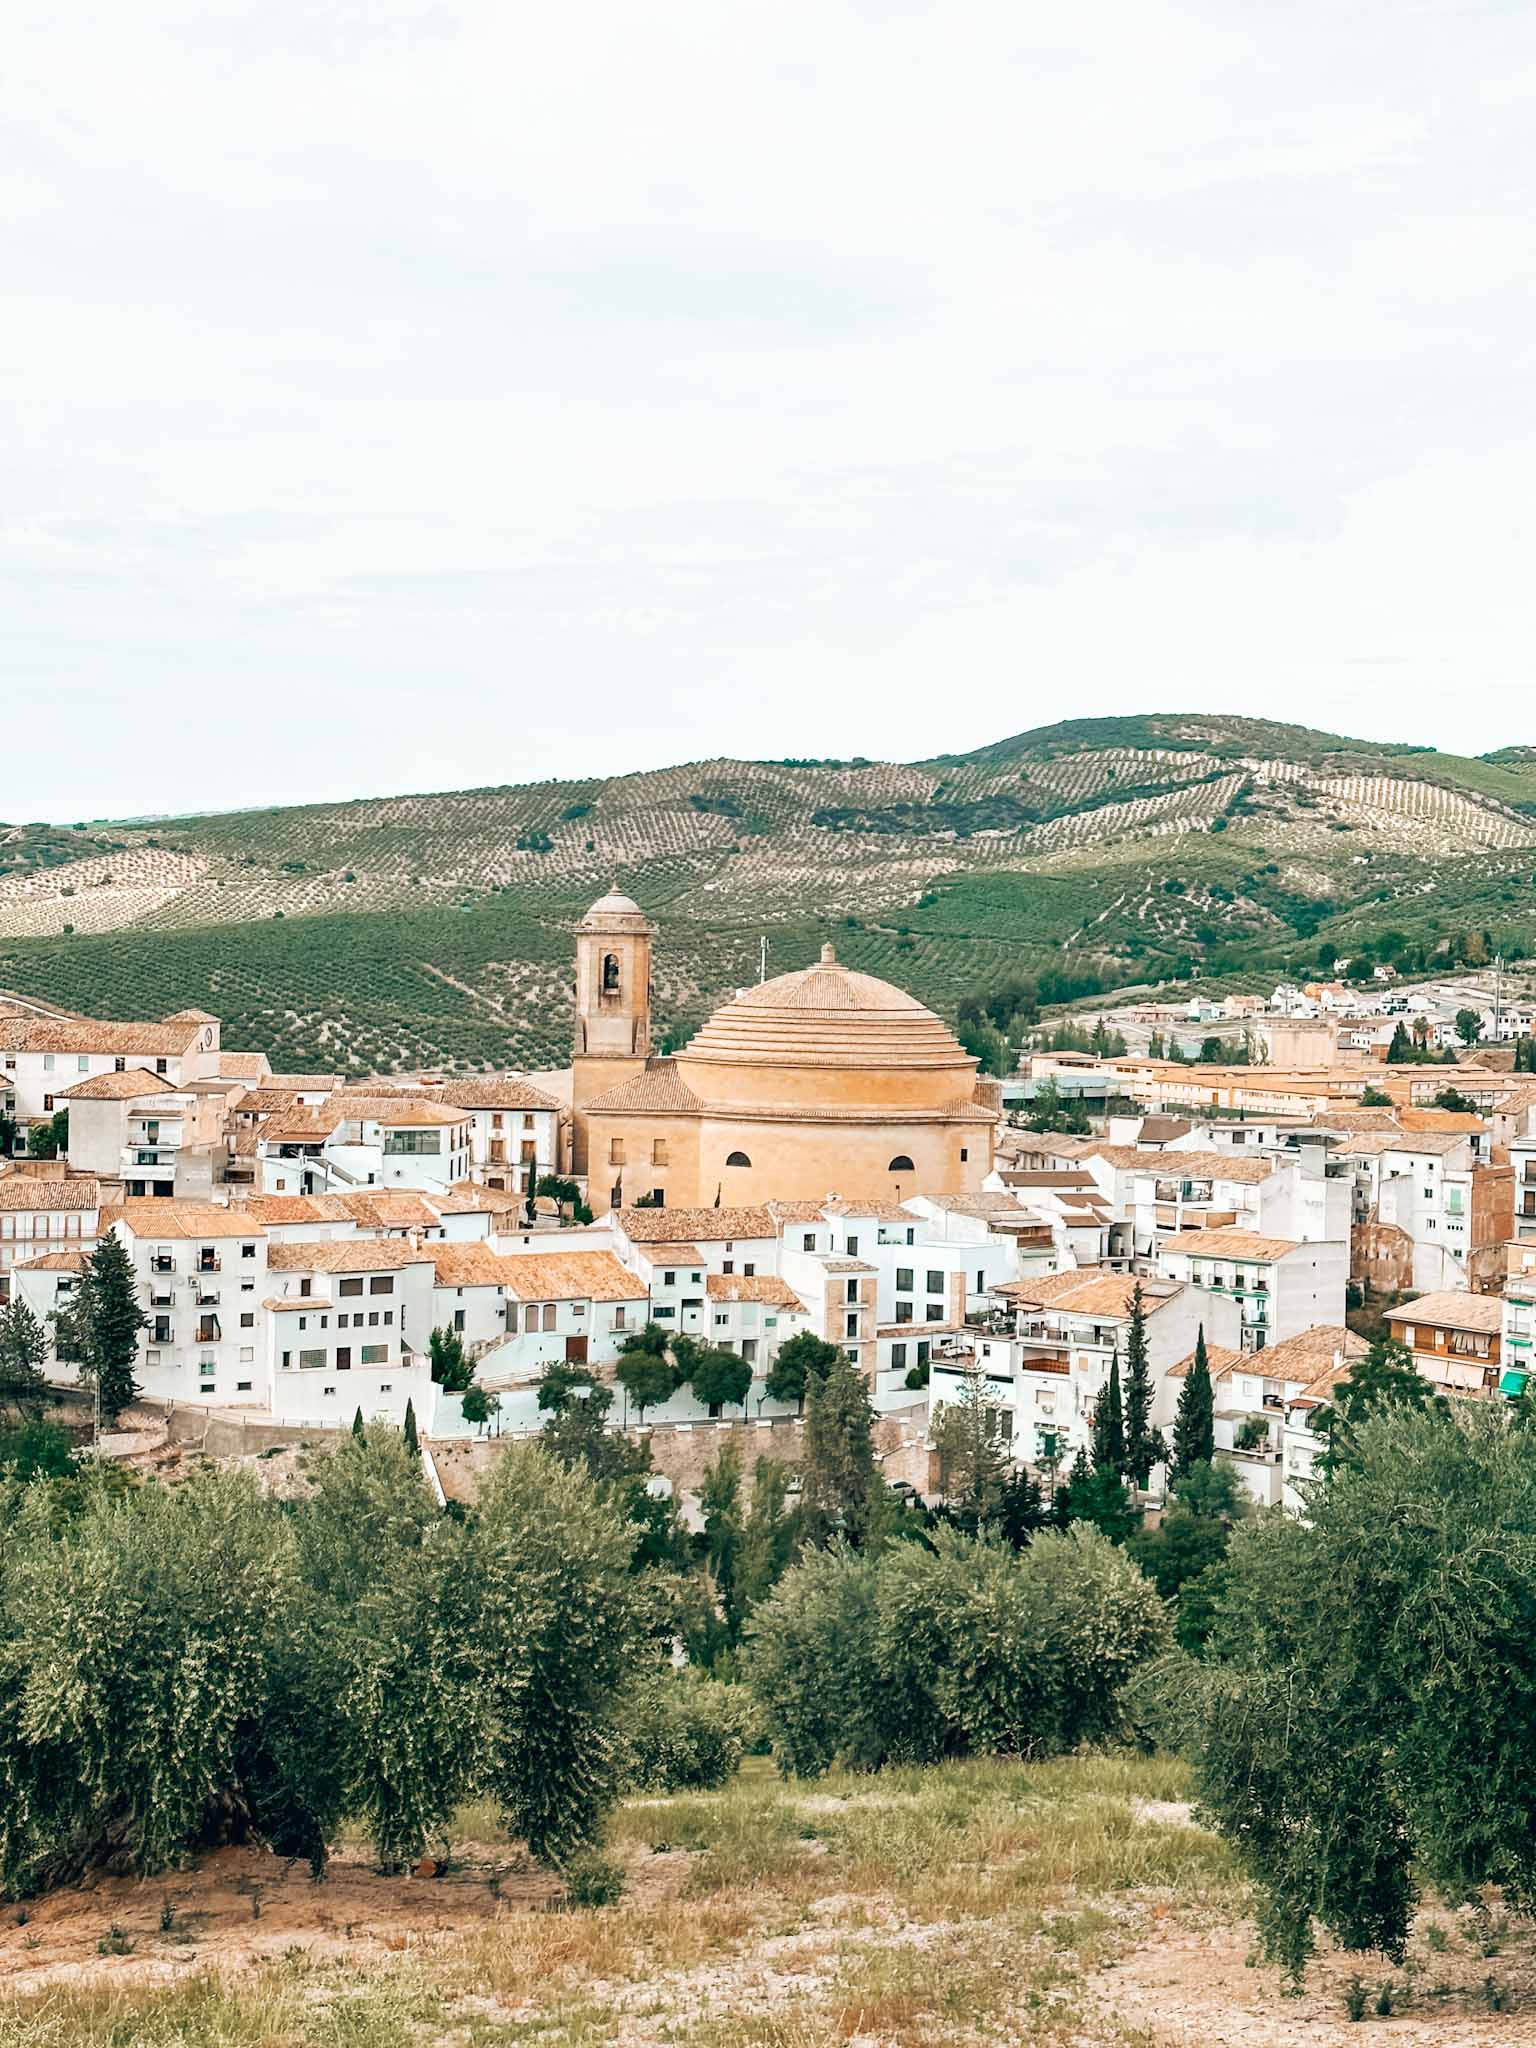 Most beautiful whitewashed villages and unique towns in Andalusia, Spain - Montefrío